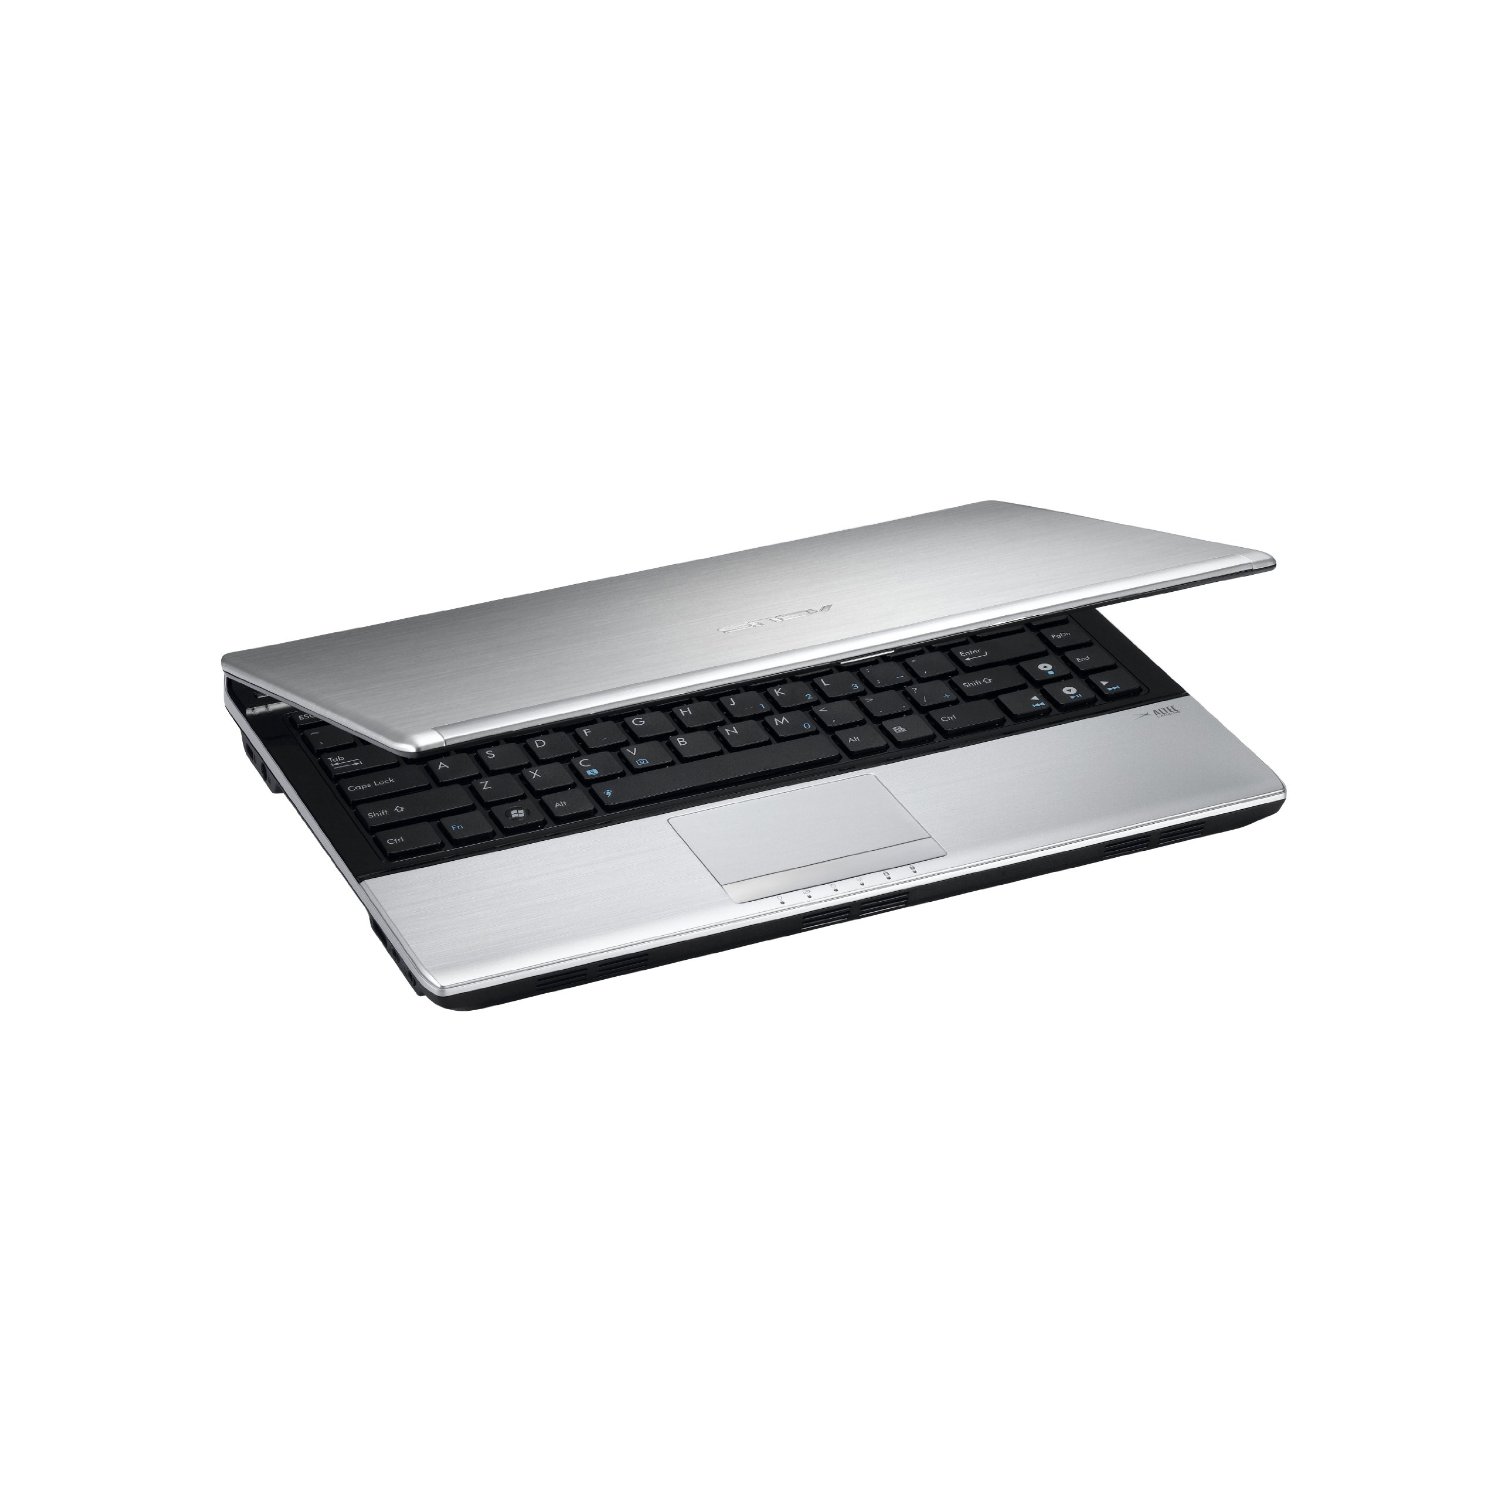 http://thetechjournal.com/wp-content/uploads/images/1108/1313118244-asus-u31sda1-133inch-thin-and-light-laptop-8.jpg